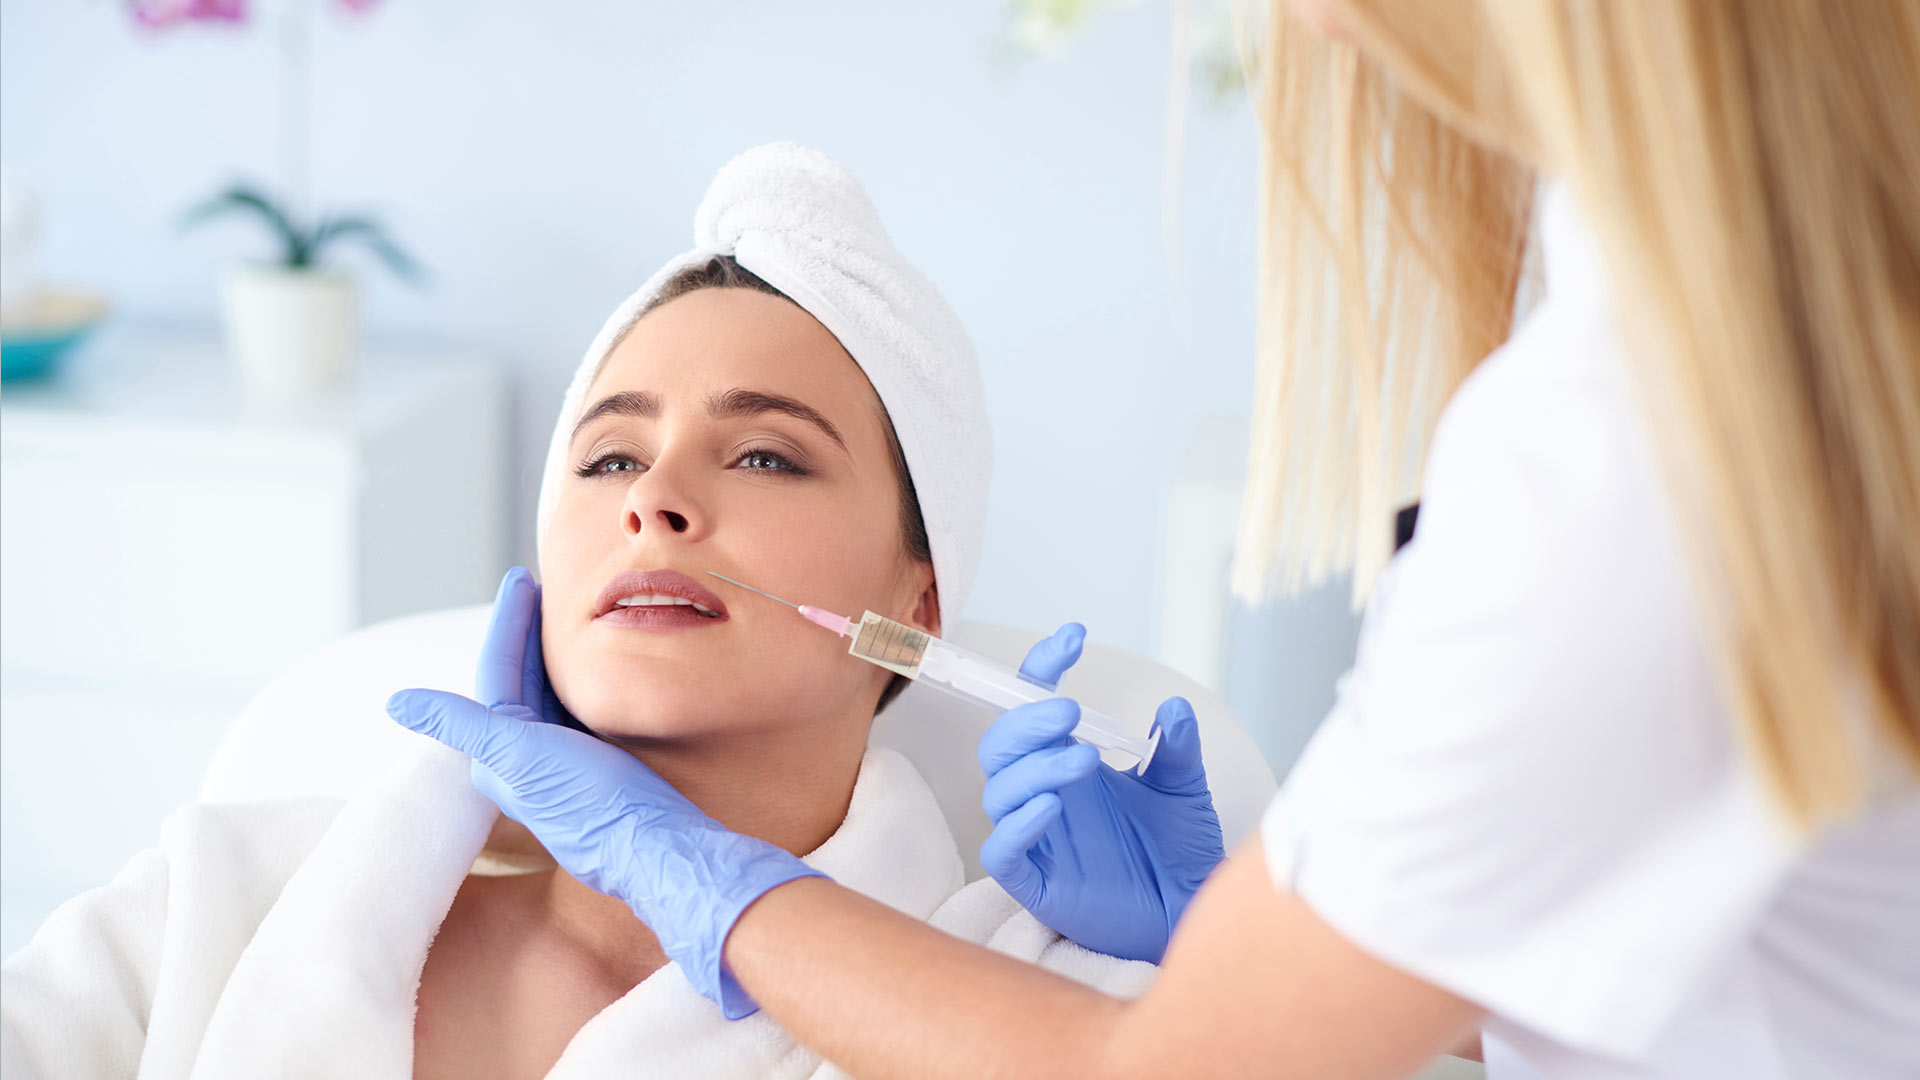 Let us know How Dermal Fillers Can Enhance Your Look.